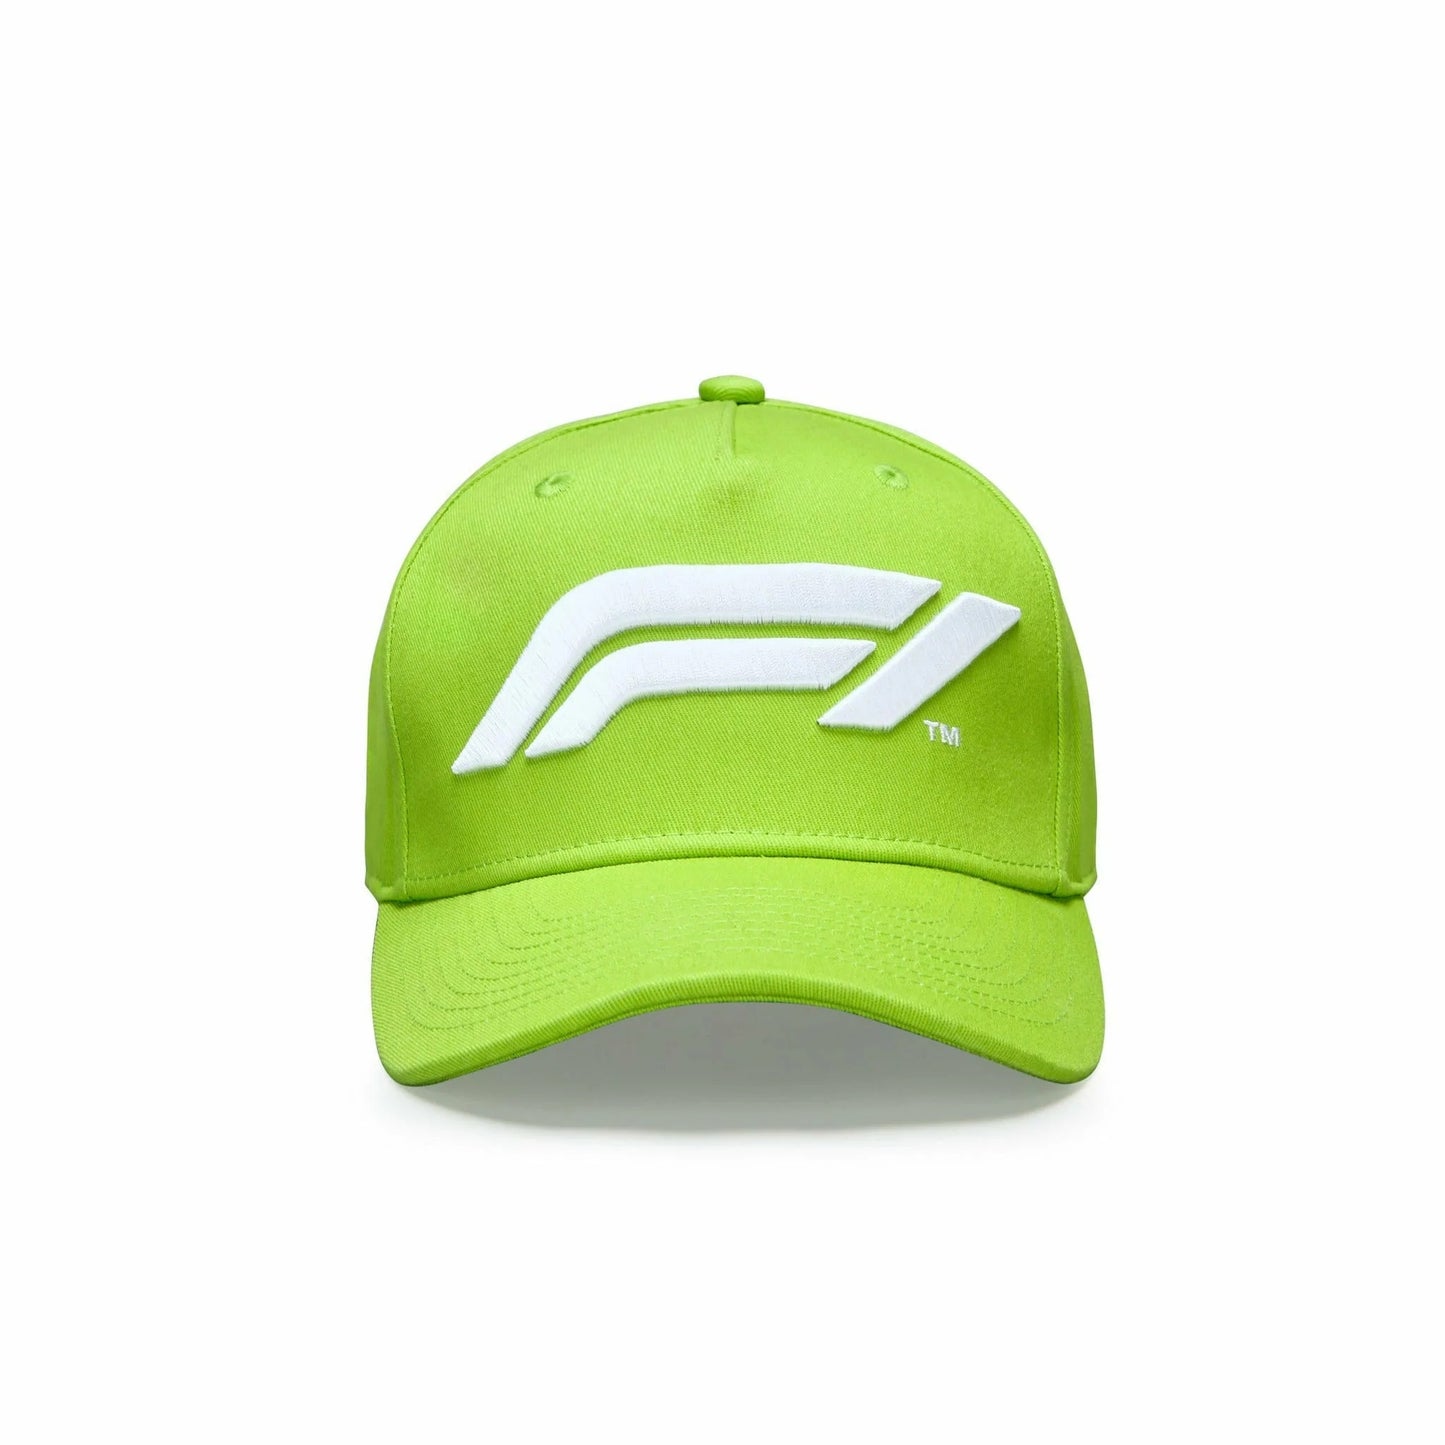 Formula 1 Collection F1, Baseball Cap, Take a lot, caps, brand caps, F1 merchandise, limited stock, best seller, online store, south africa, F1 hats, mr price, accessories, unisex, f1 caps, f1 hats, limited edition